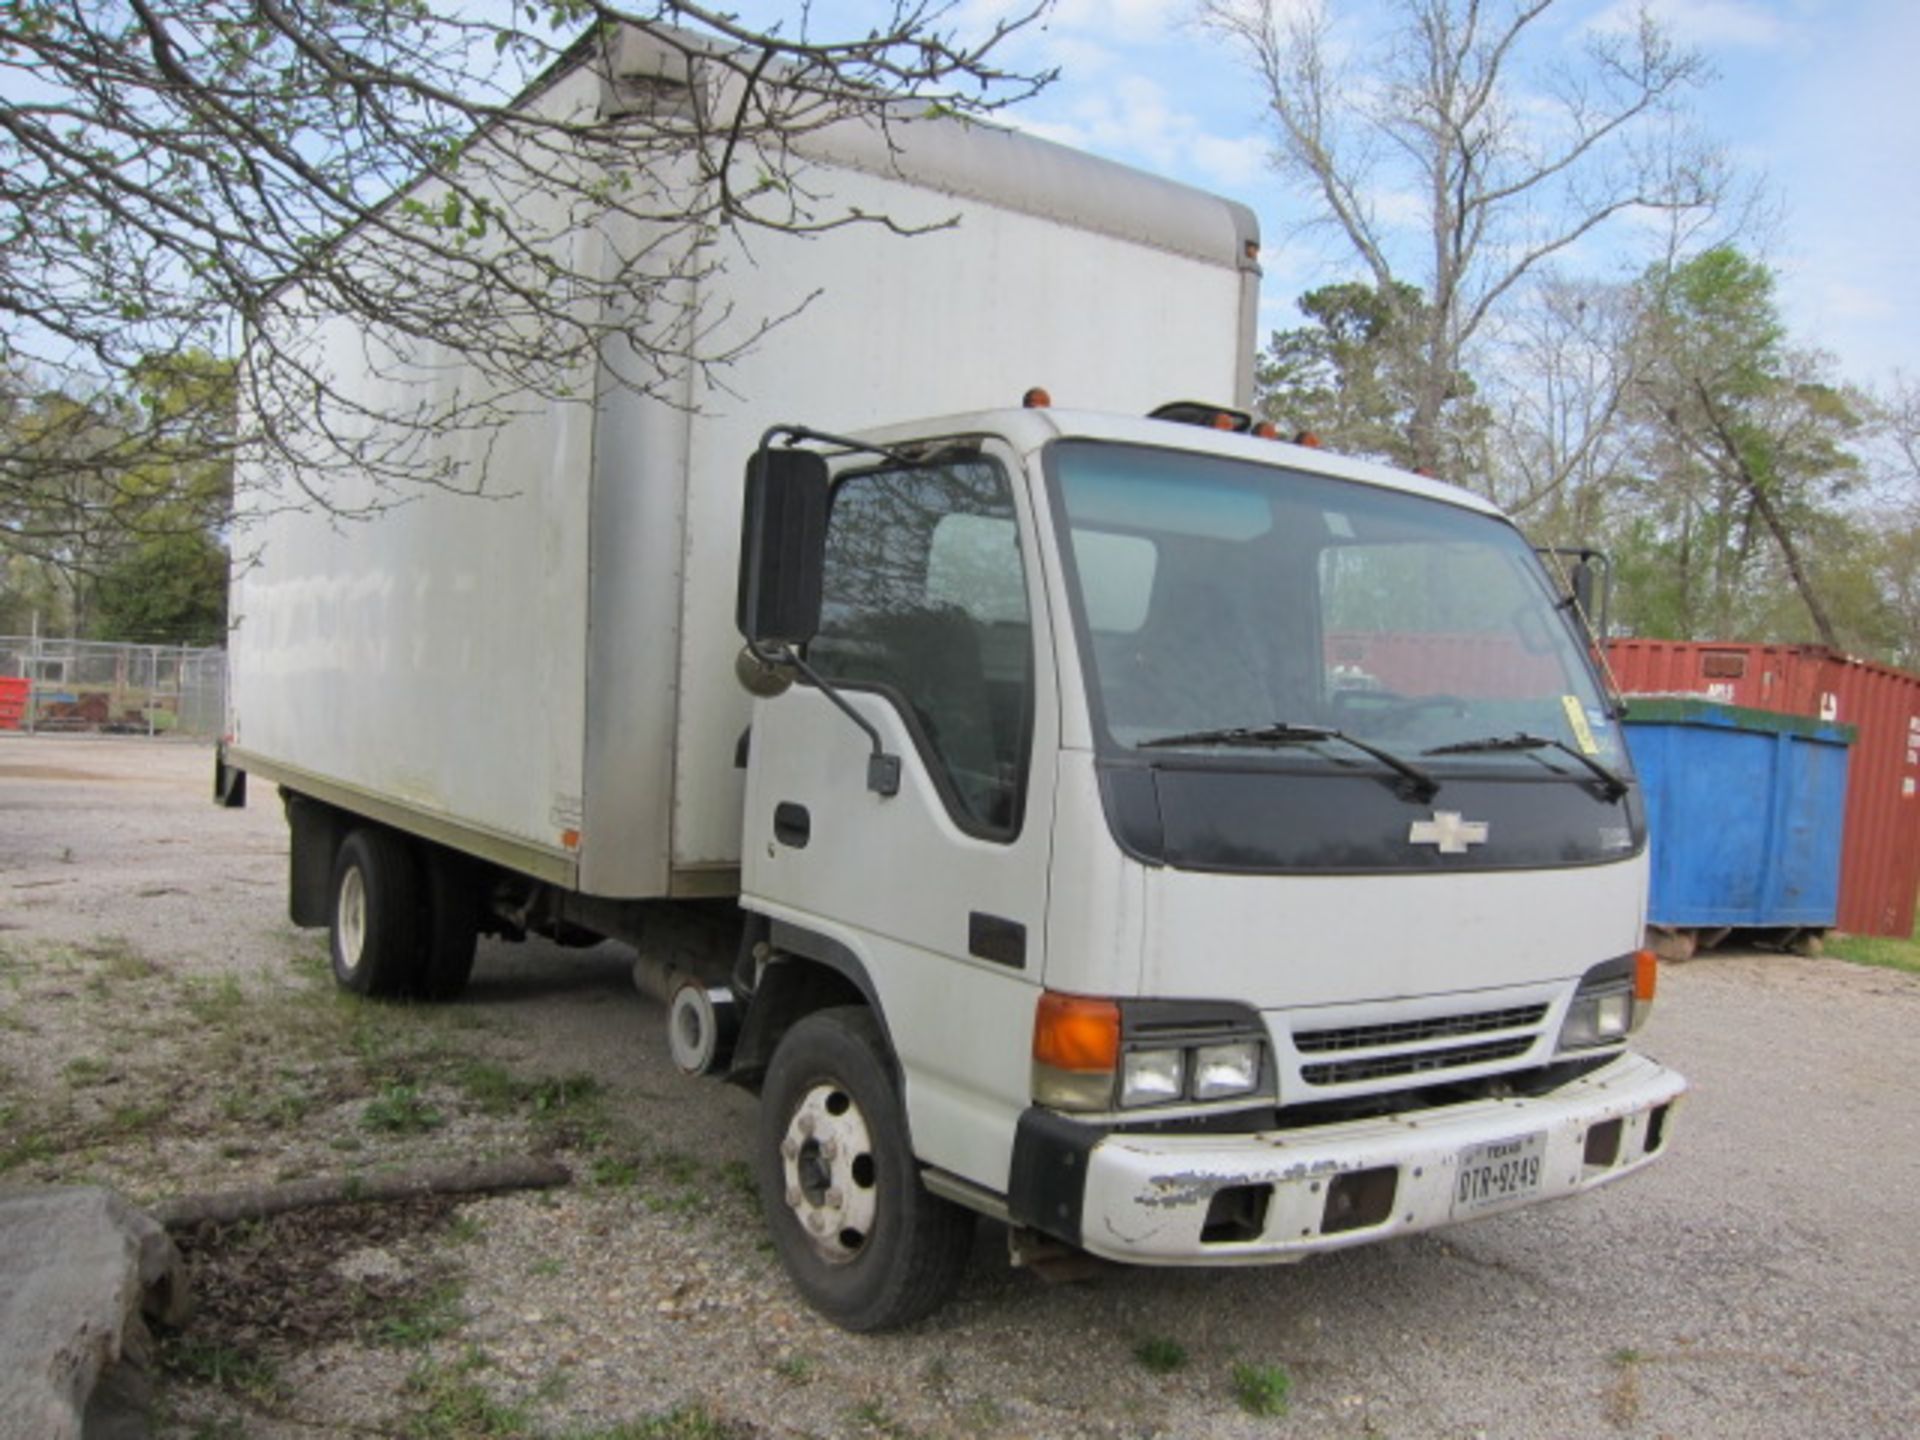 BOX TRUCK, 2002 CHEVROLET MDL. W4500, turbo intercooled diesel engine, Supreme Corp. box end, 15' - Image 2 of 5